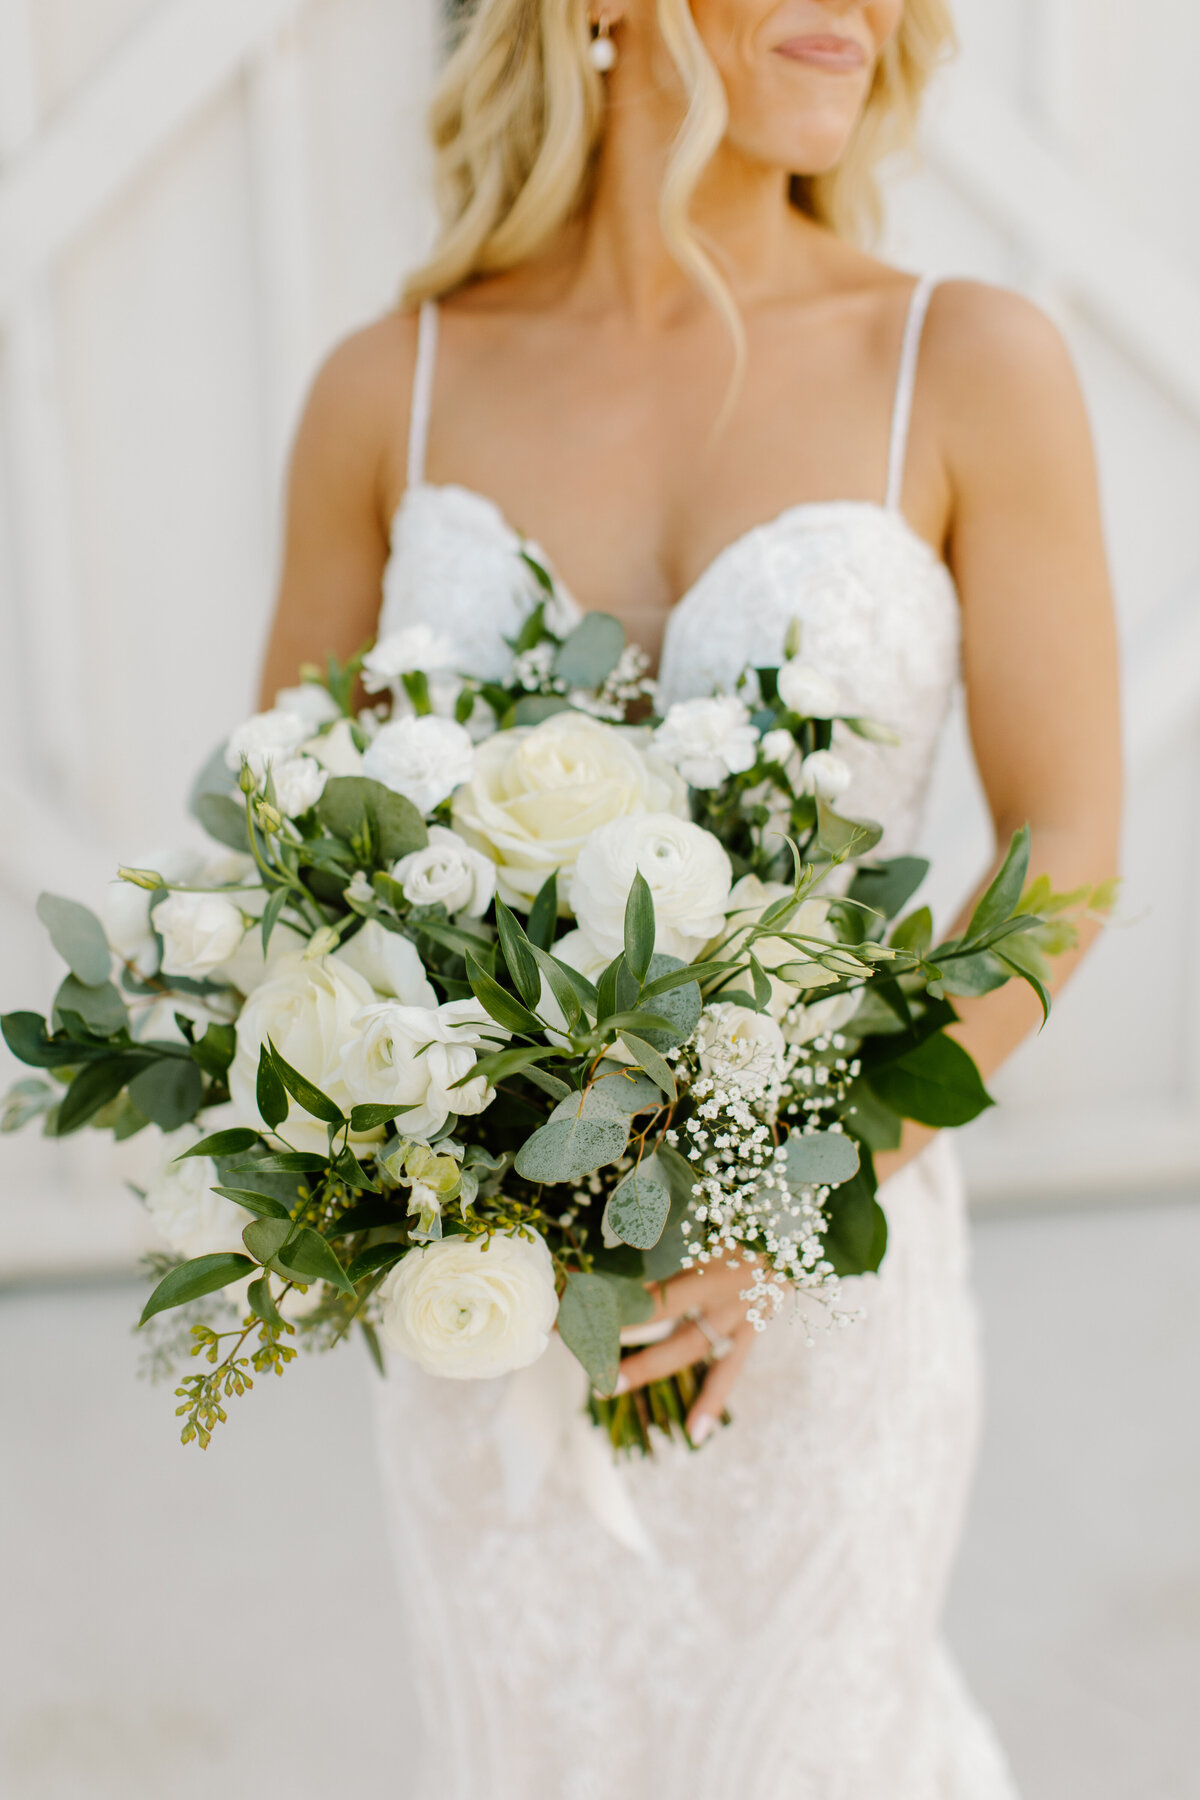 Full bridal bouquet of ivory and greenery